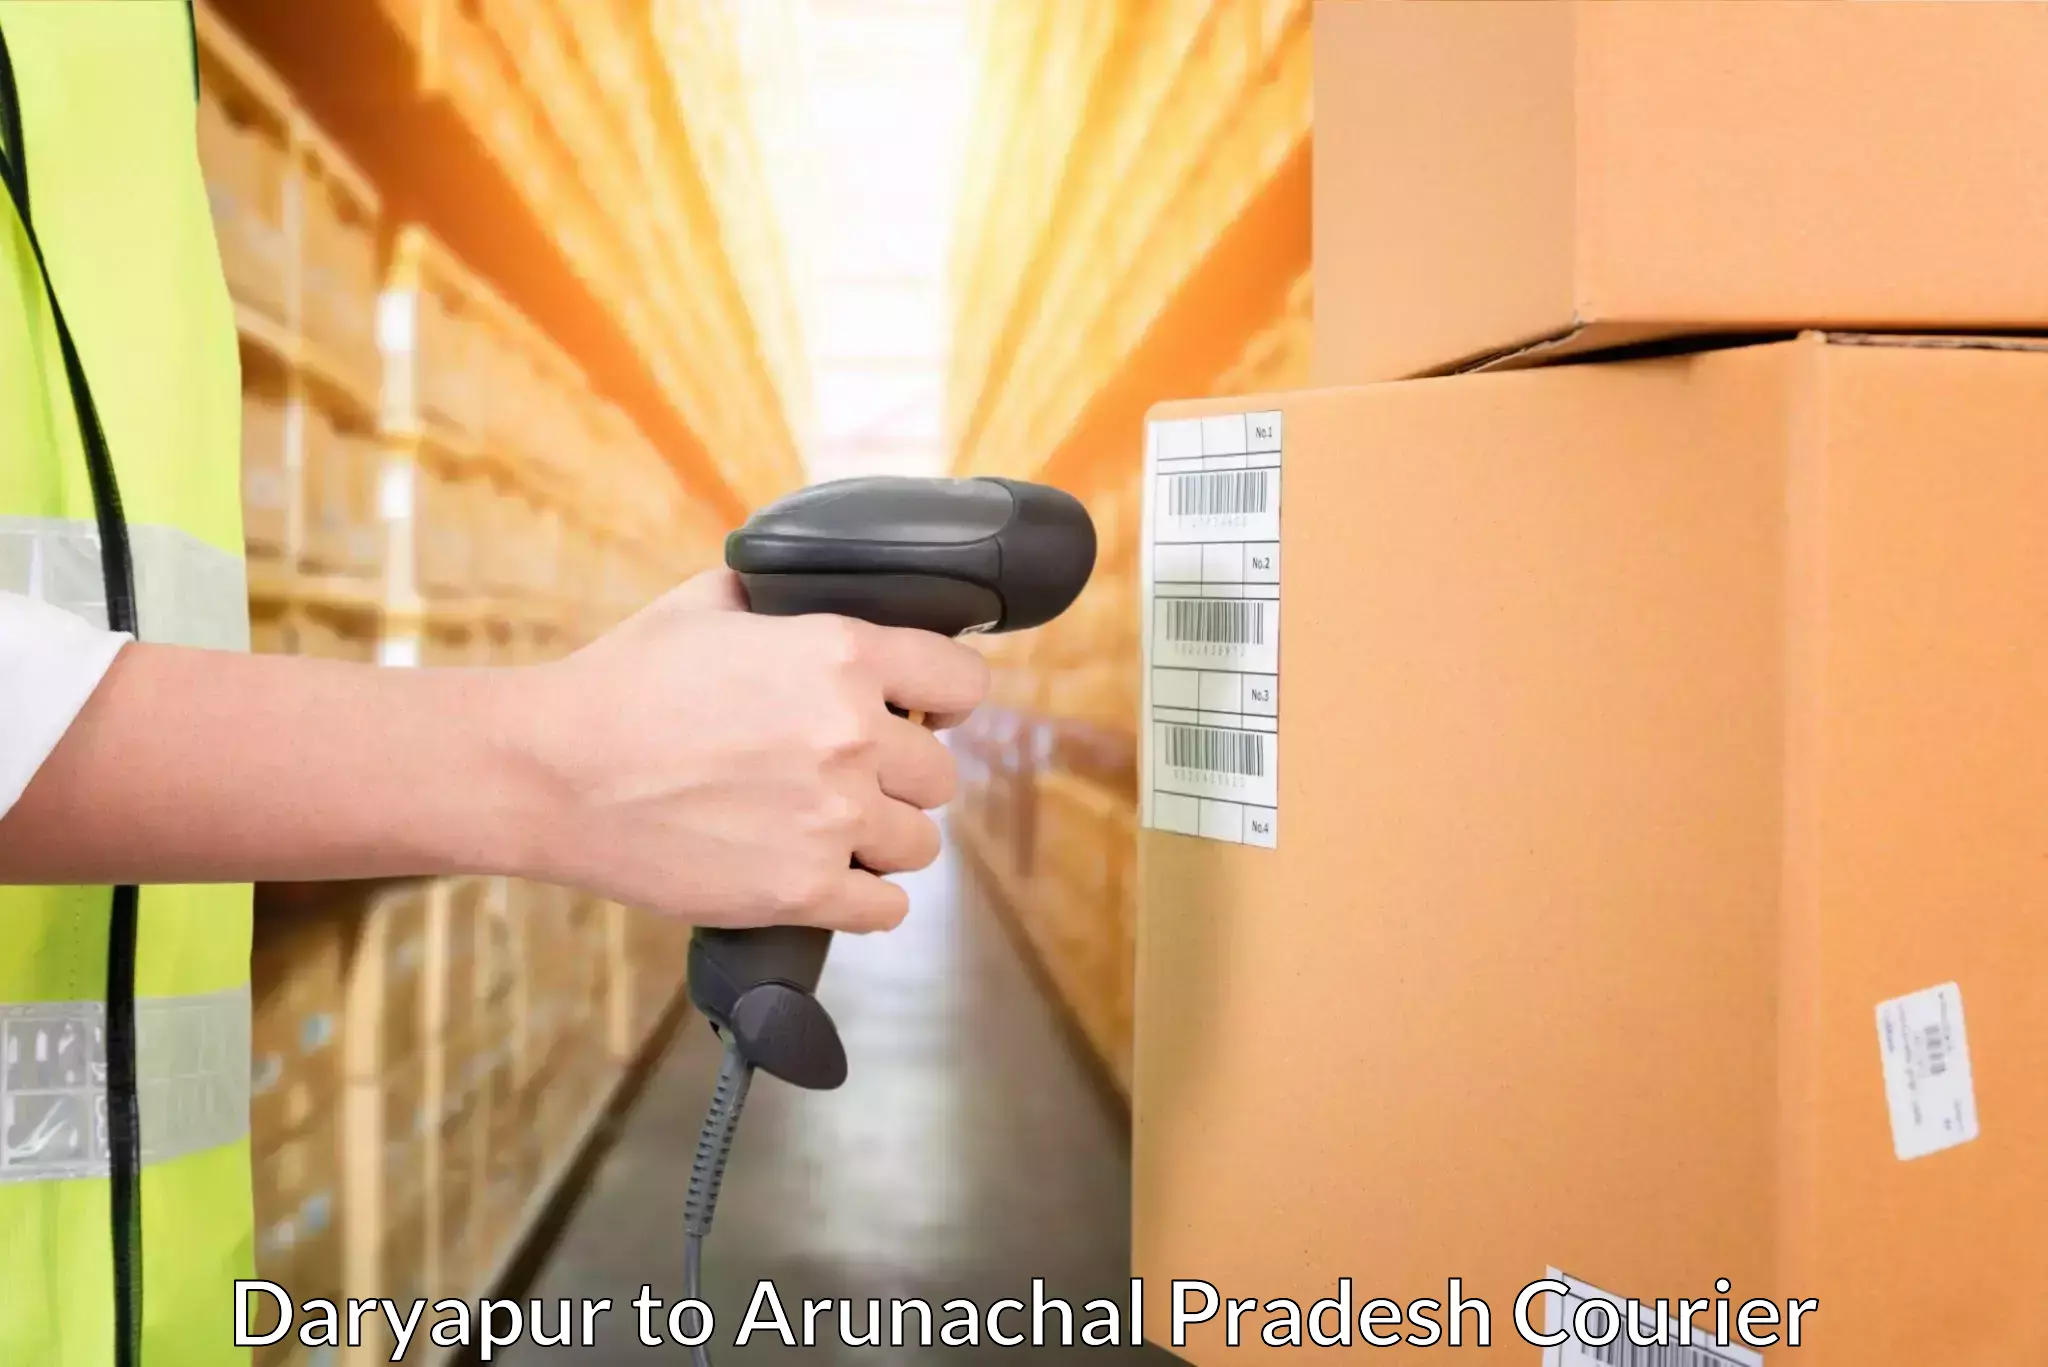 State-of-the-art courier technology Daryapur to Dirang